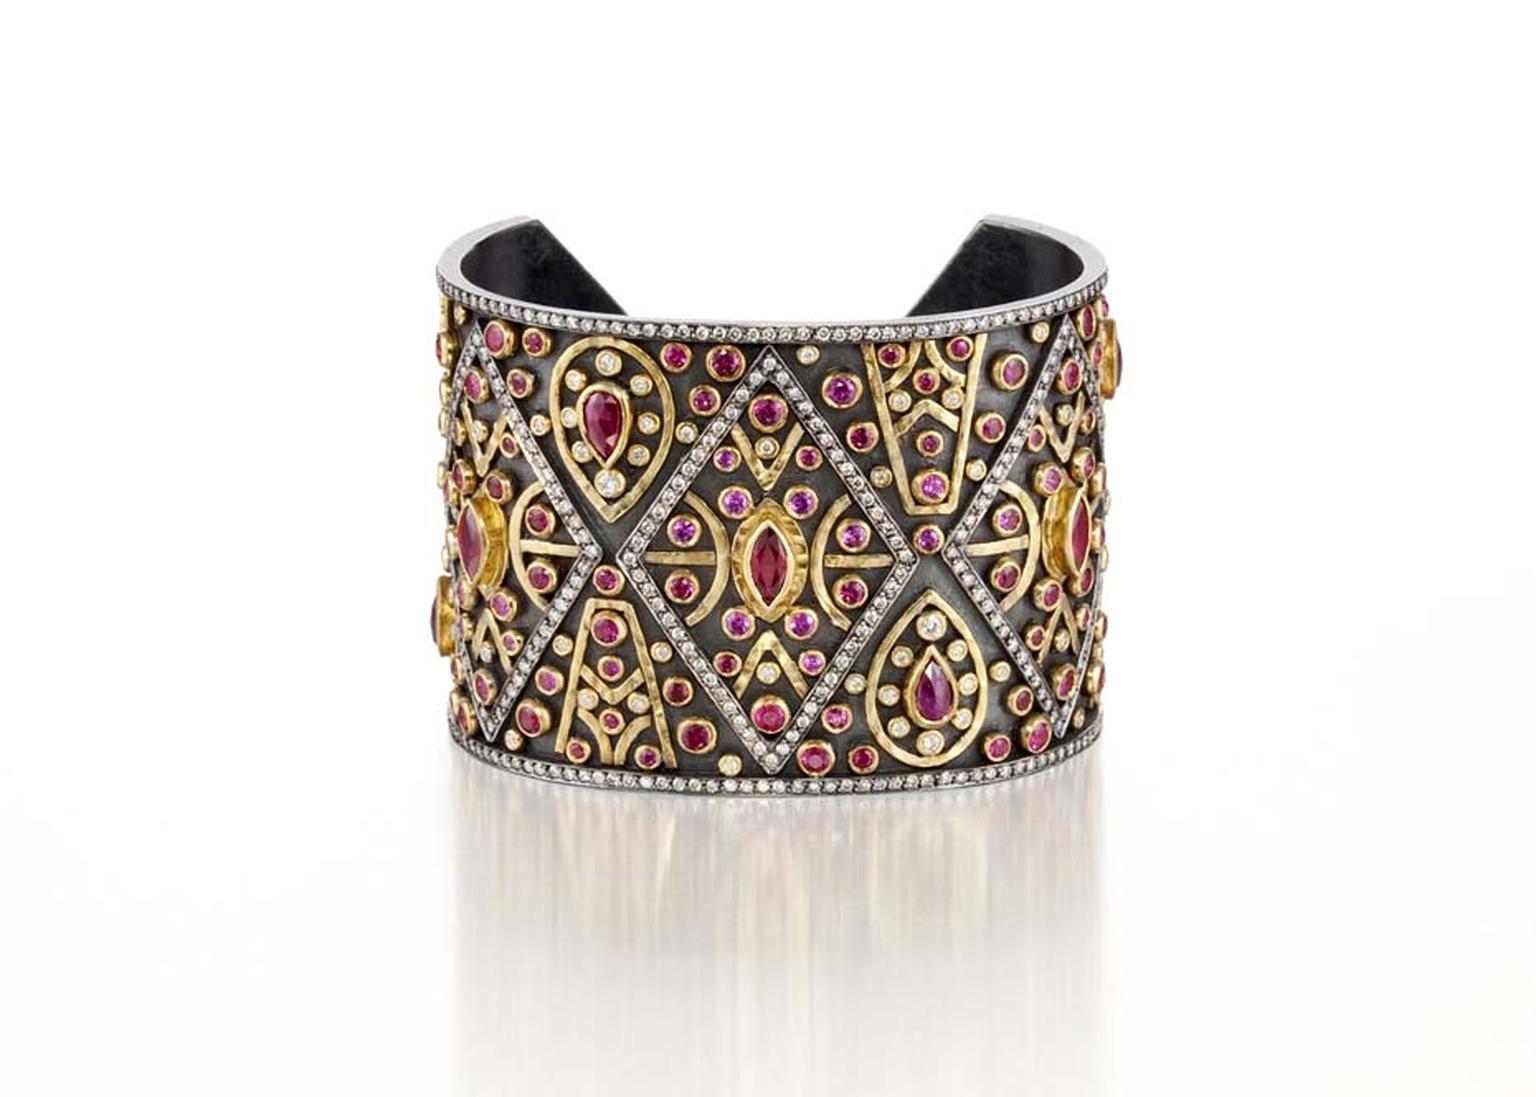 Annie Fensterstock gold and blackened silver Cleopatra cuff featuring diamonds, rubies and pink sapphires.